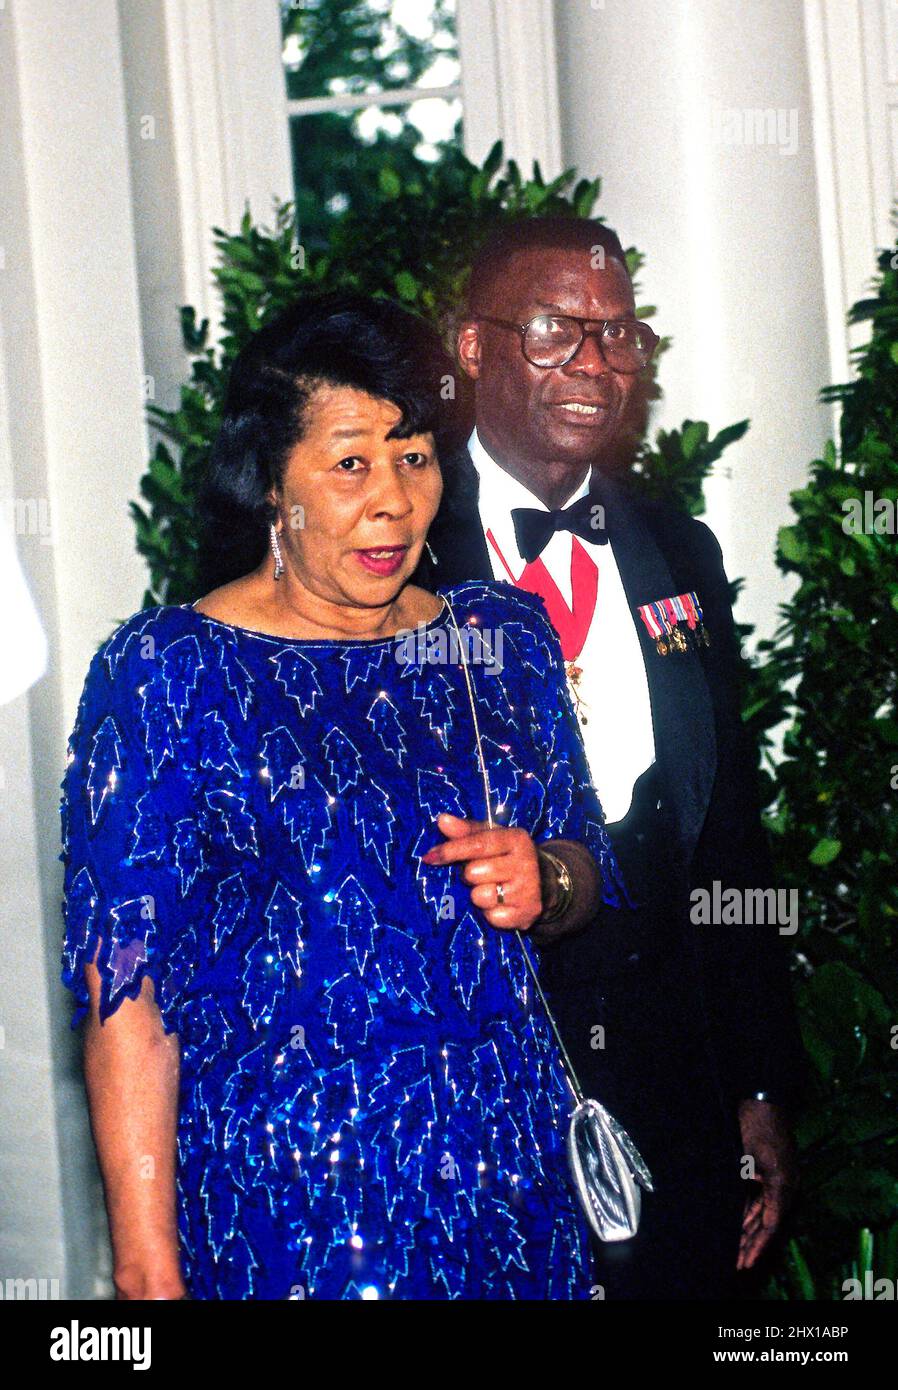 President of Prairie View A&M University and former FEMA Director, United States Army Lieutenant General (Retired) Julius W. Becton, Jr and his wife, Louise, arrive at the White House in Washington, DC for the State Dinner honoring Queen Elizabeth II on May 14, 1991. Credit: Ron Sachs/CNP Stock Photo